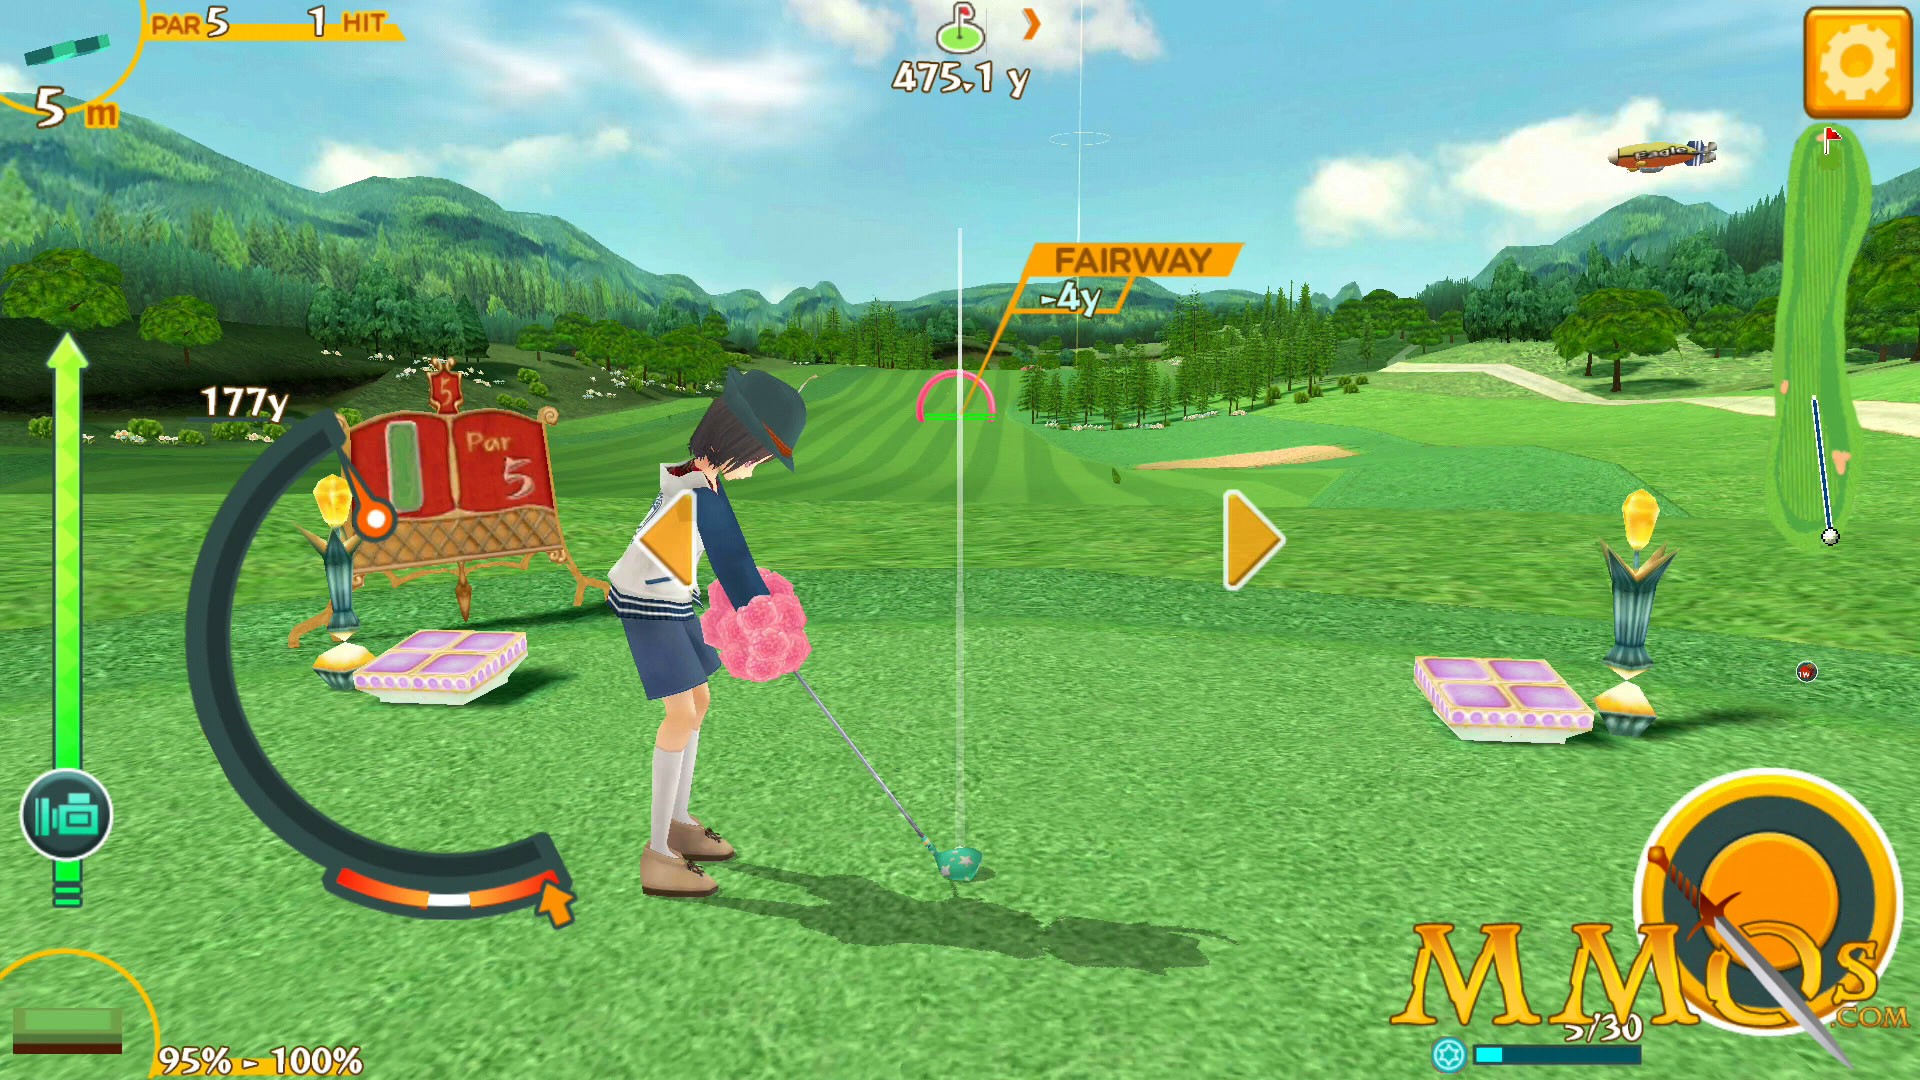 pangya golf not working on ppsspp